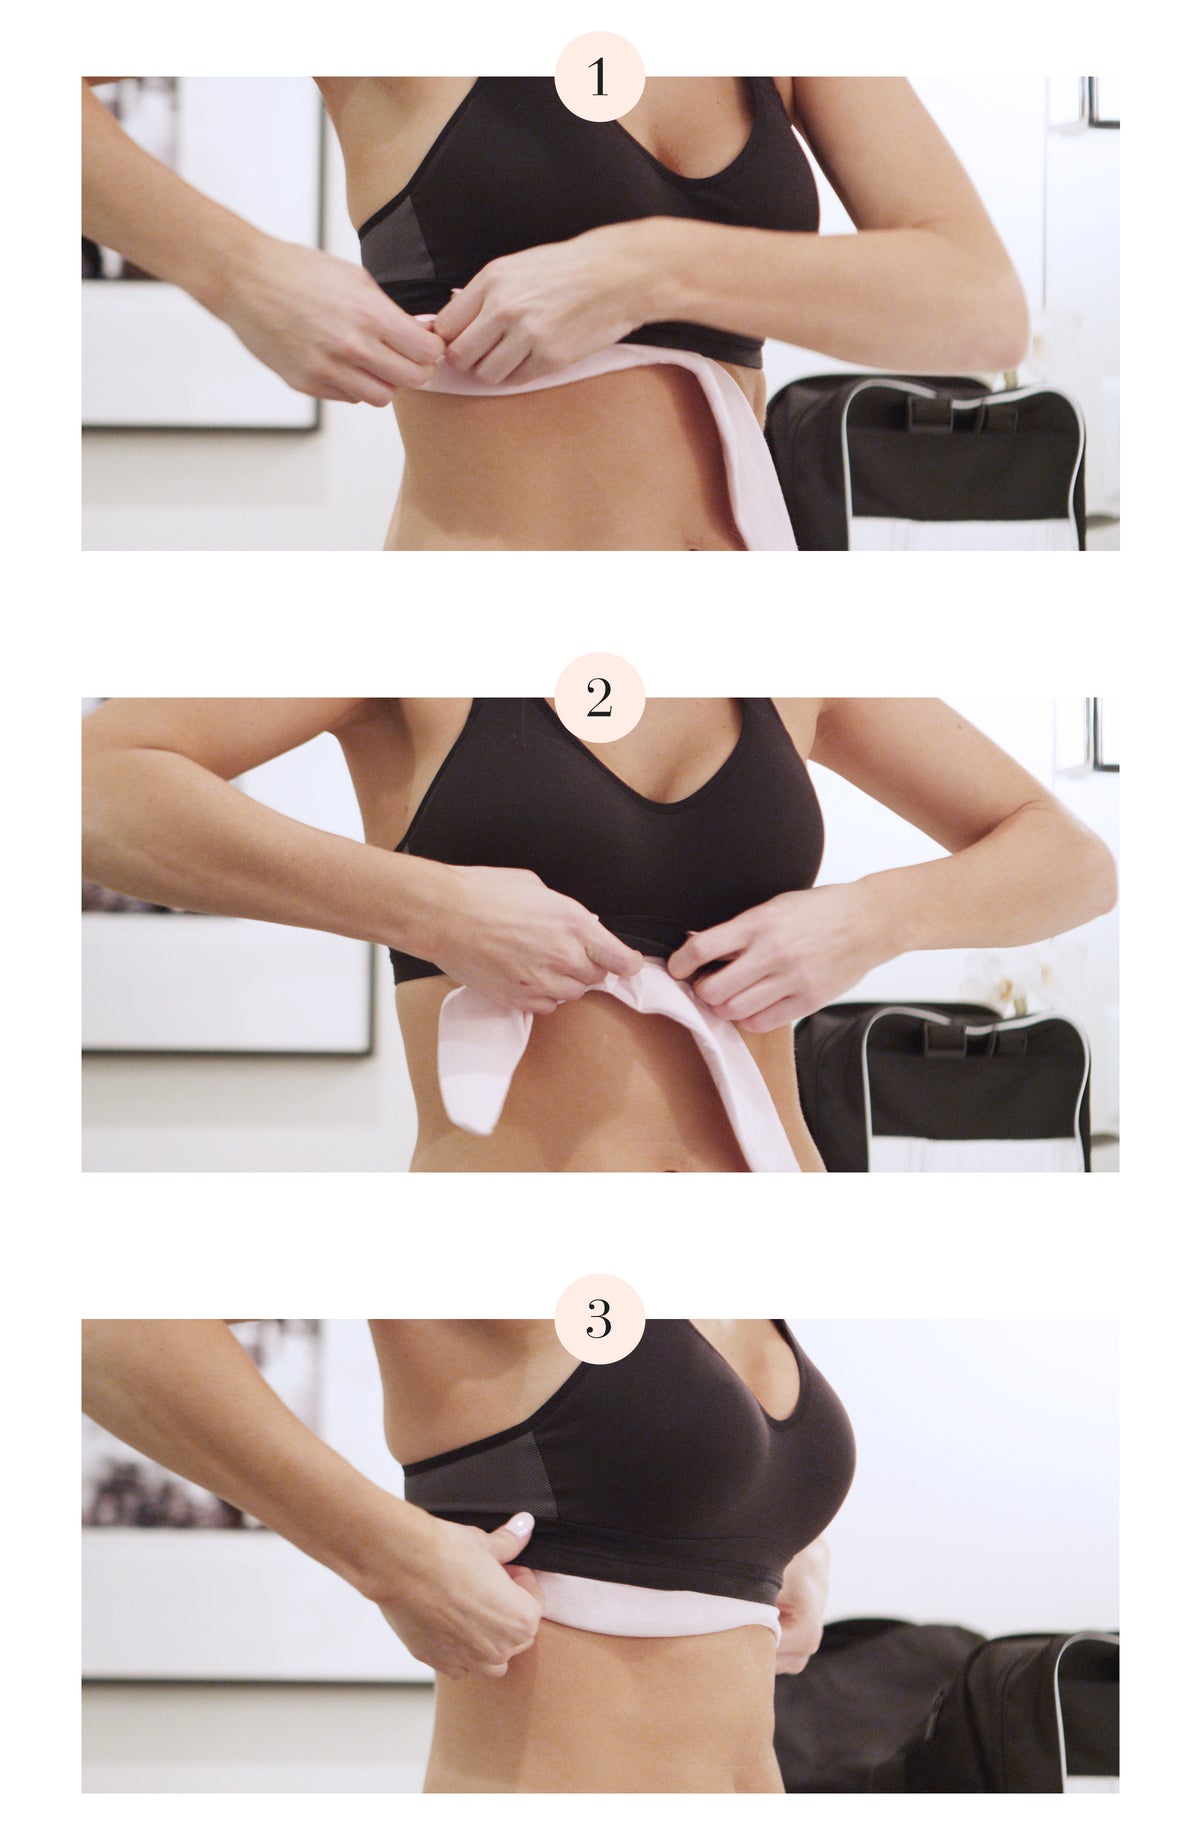 Eliminate Boob Sweat with Belly Bandit's Don't Sweat It Bra